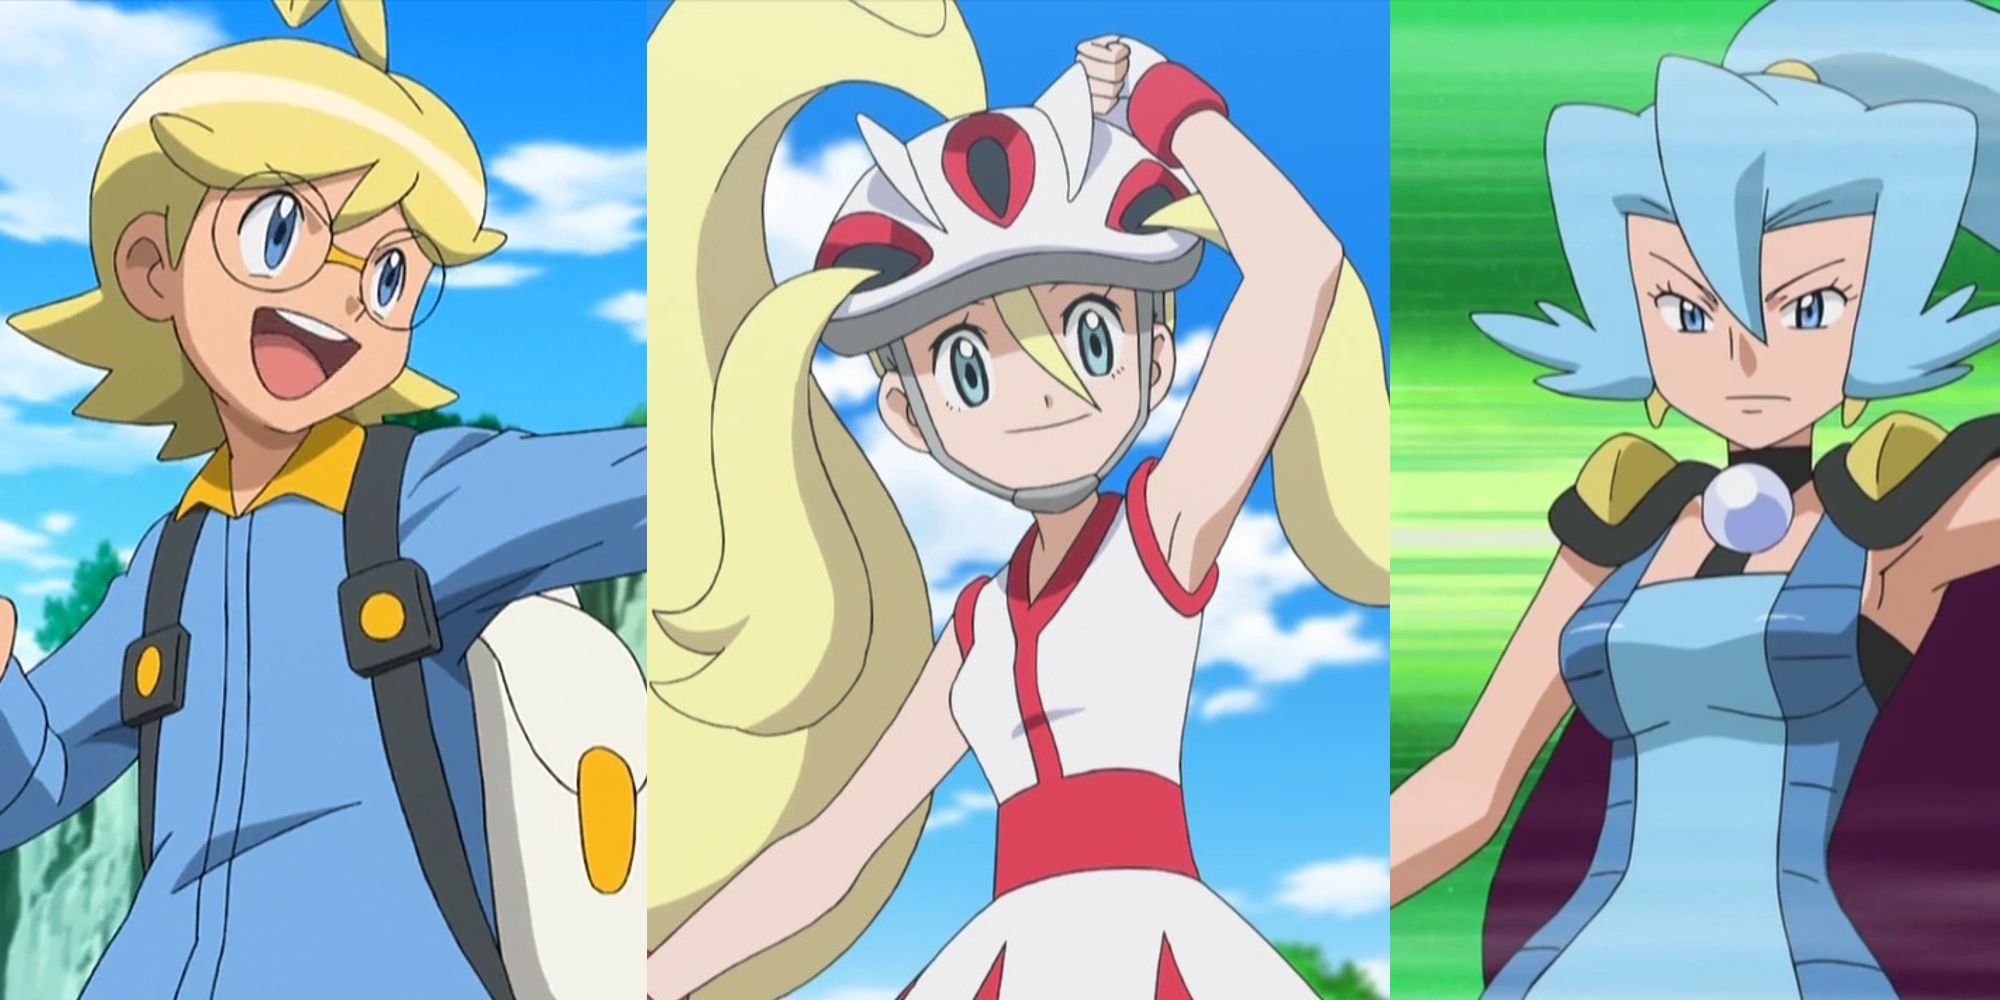 Clemont wearing his backpack in battle; Korrina in her roller skate gear; Clair appearing in front of green action lines